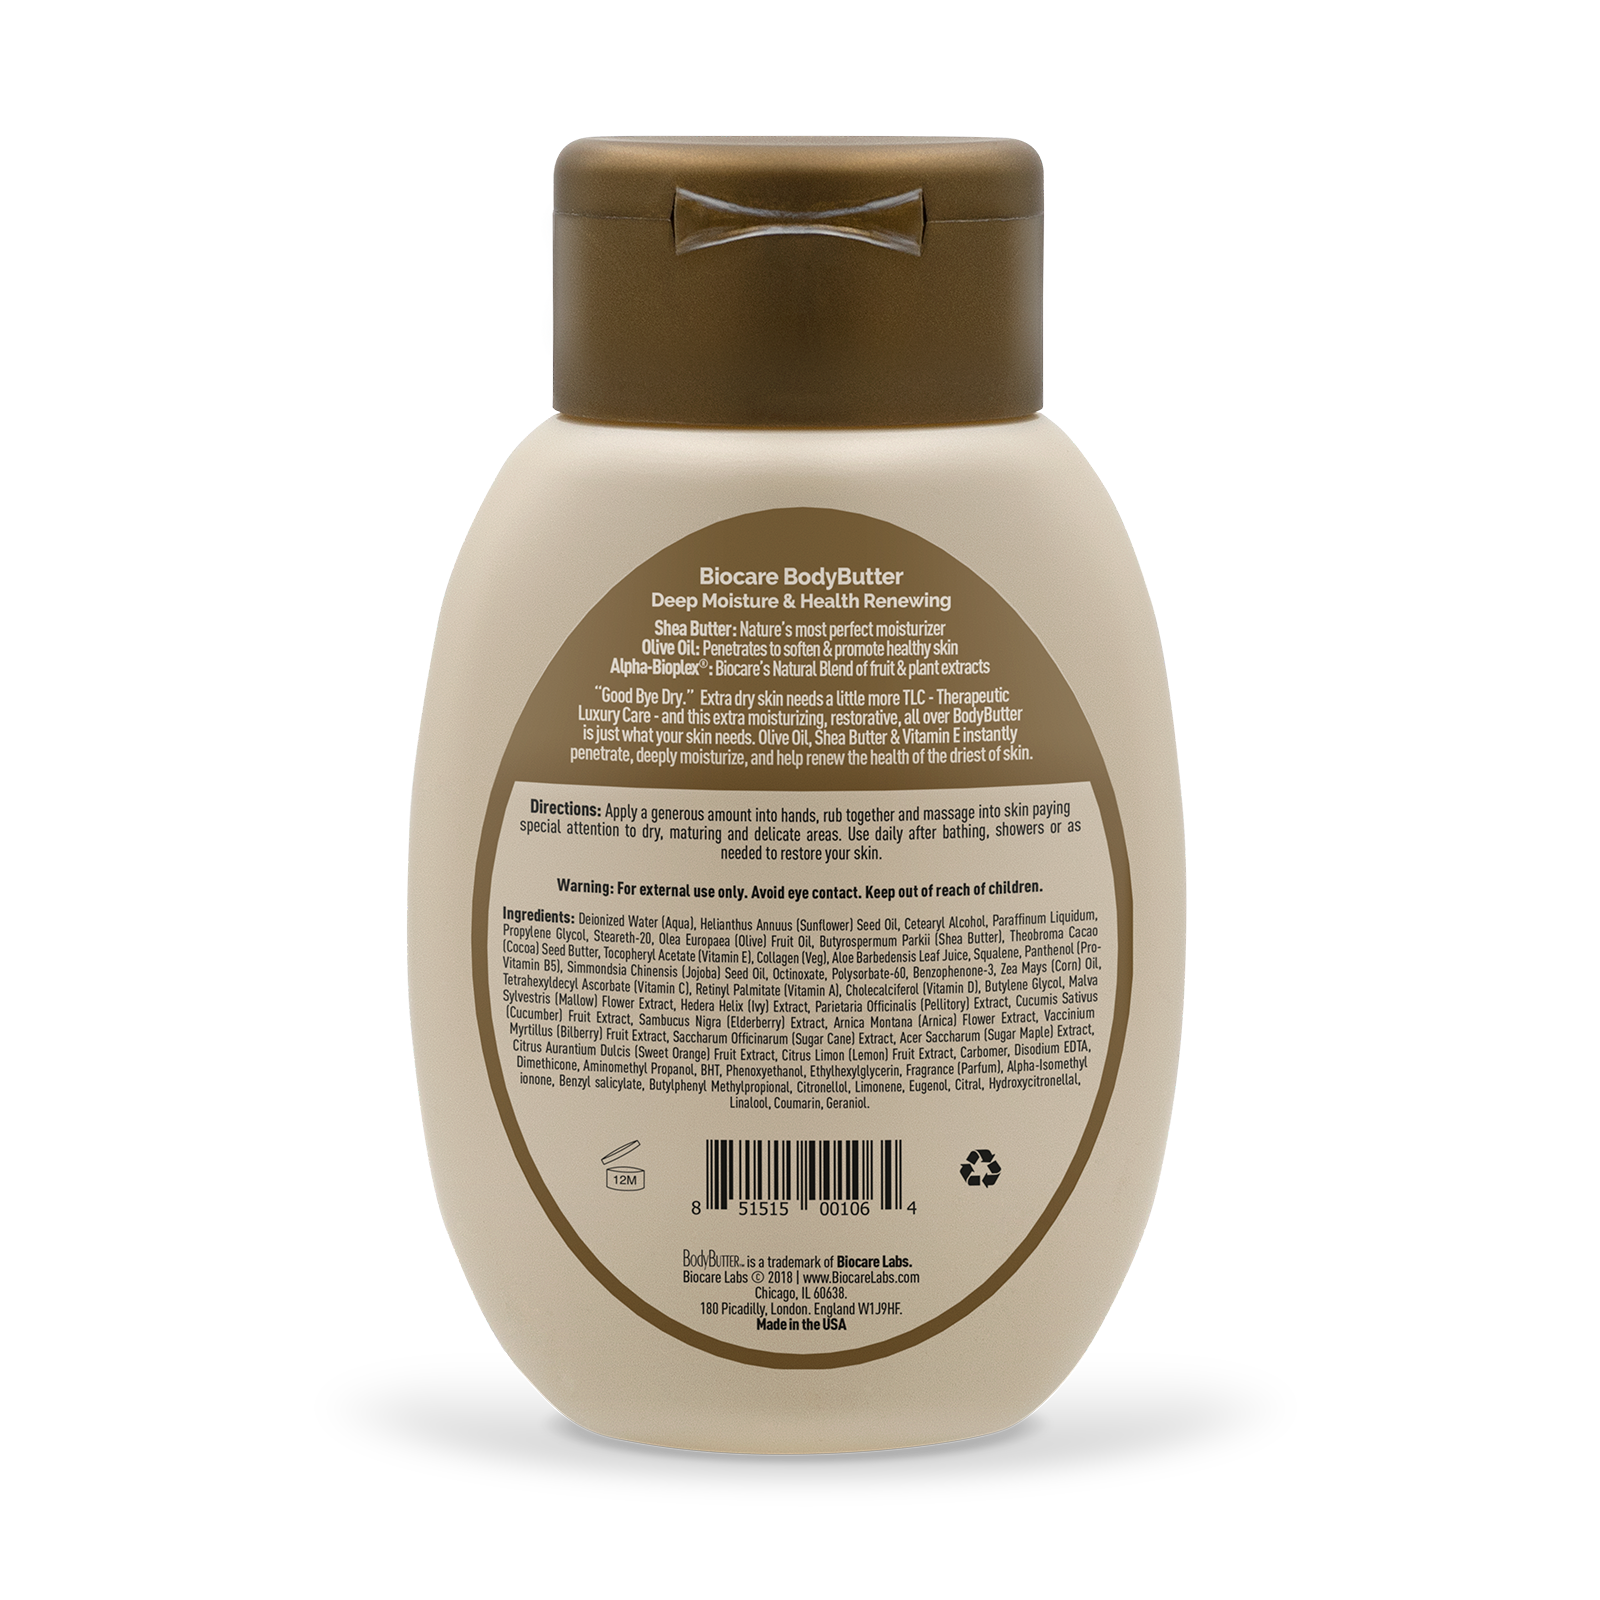 Back label of an 8 oz bottle of BodyButter™ With Olive Oil & Shea Butter from Biocare Labs